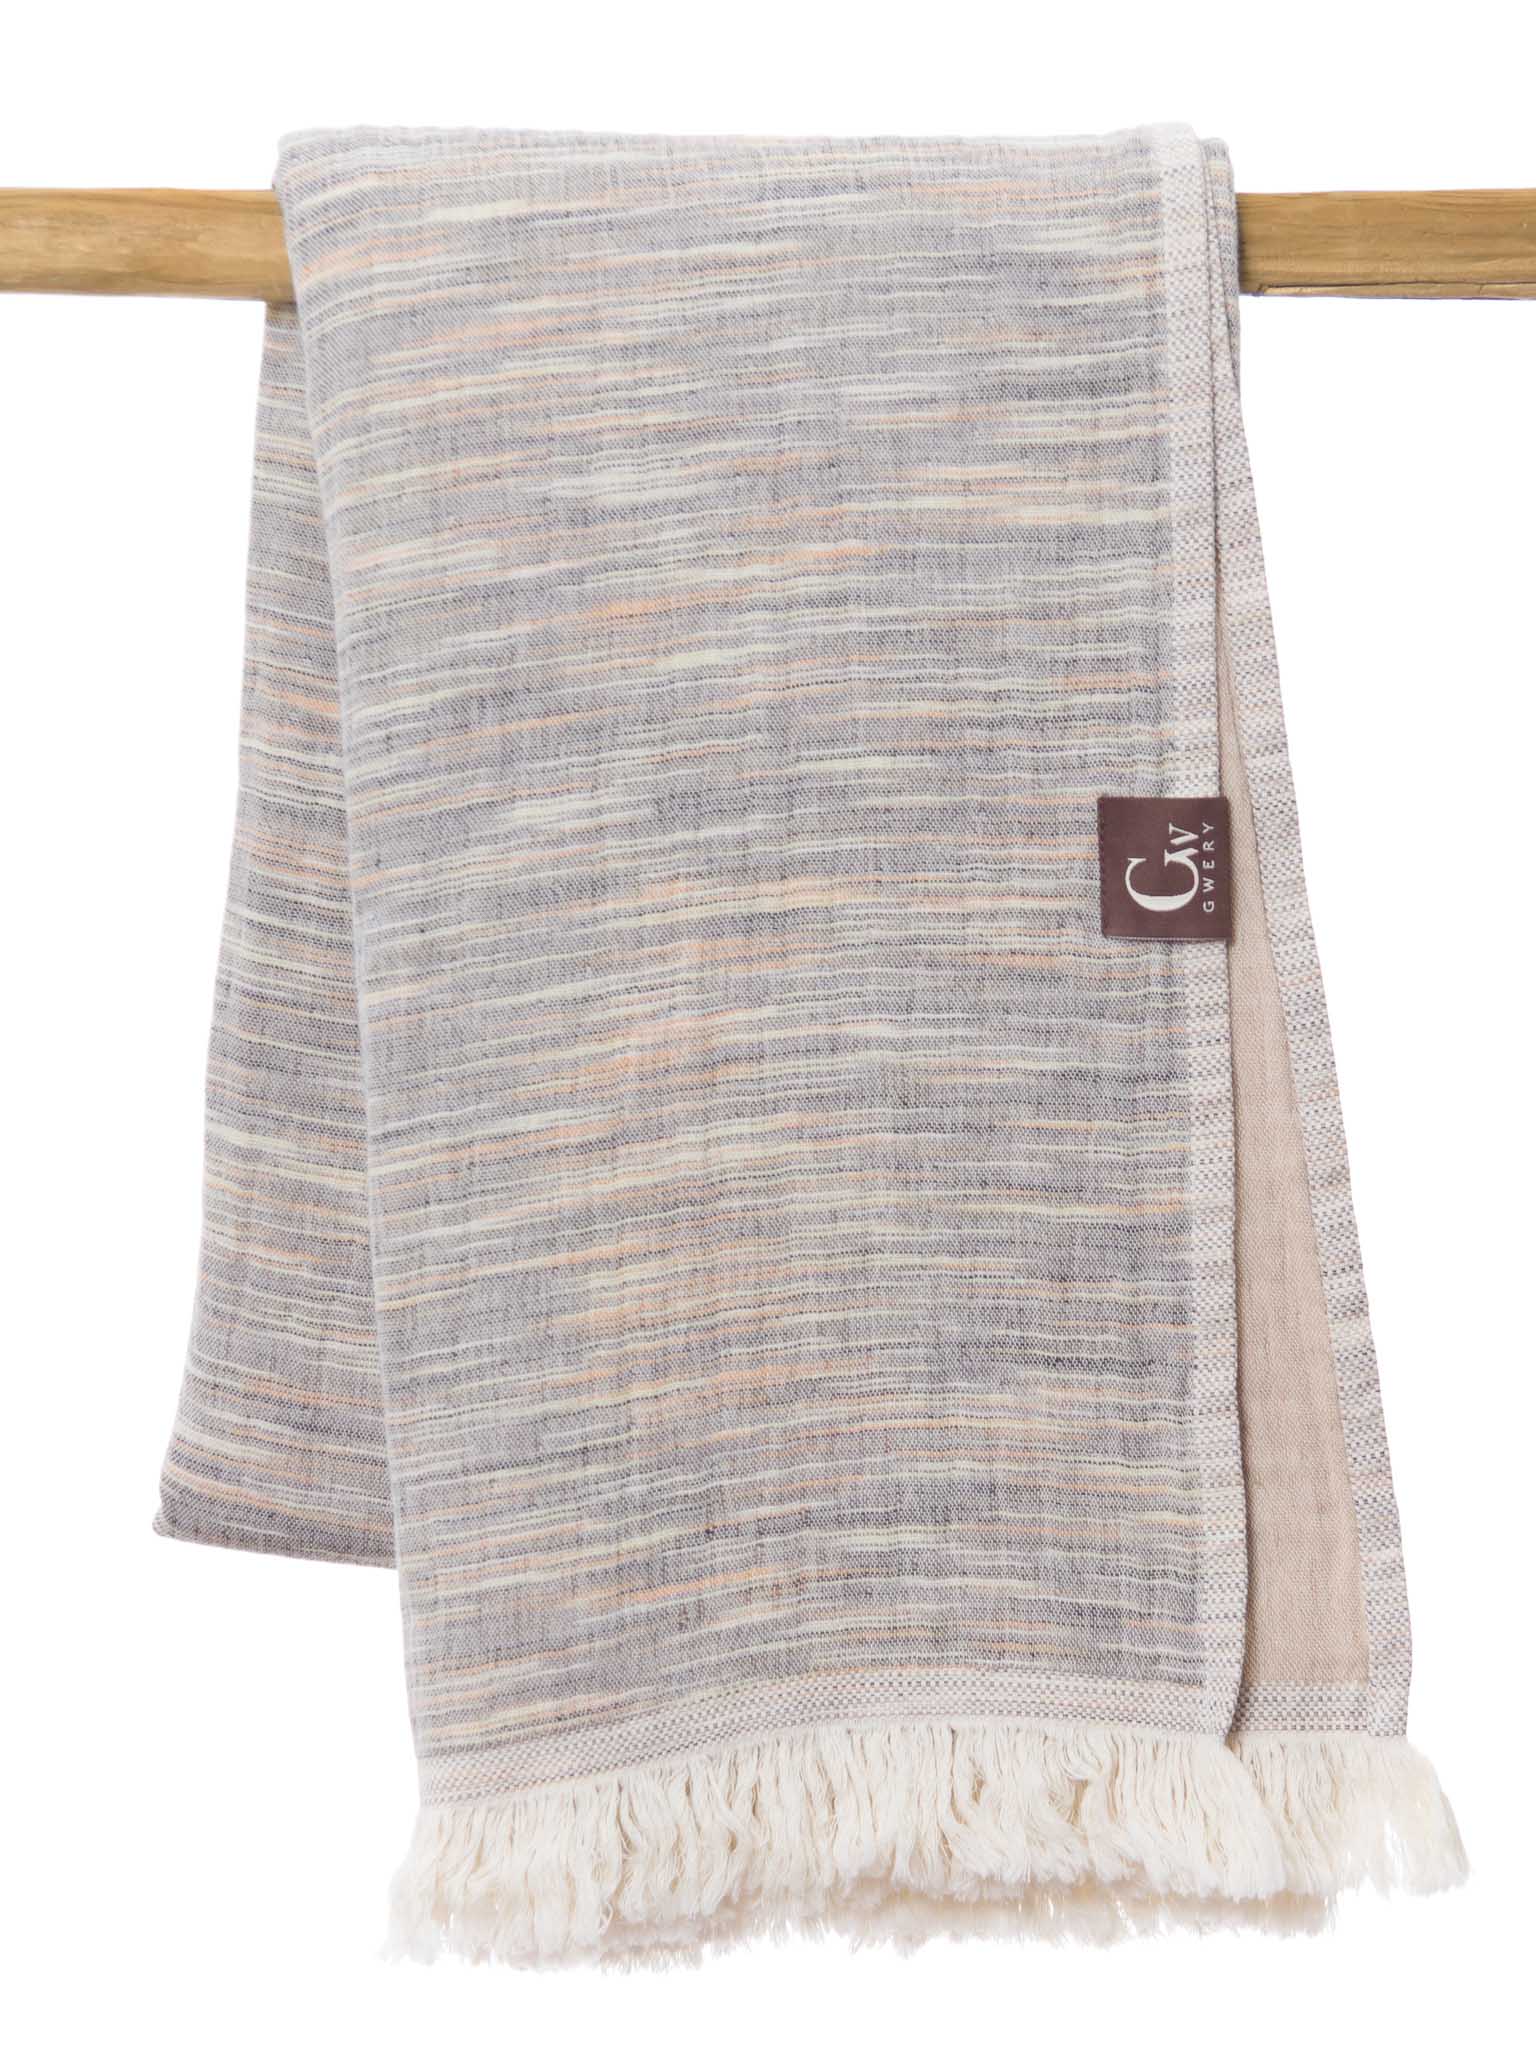 Brown patterned, double sided, beach towel folded